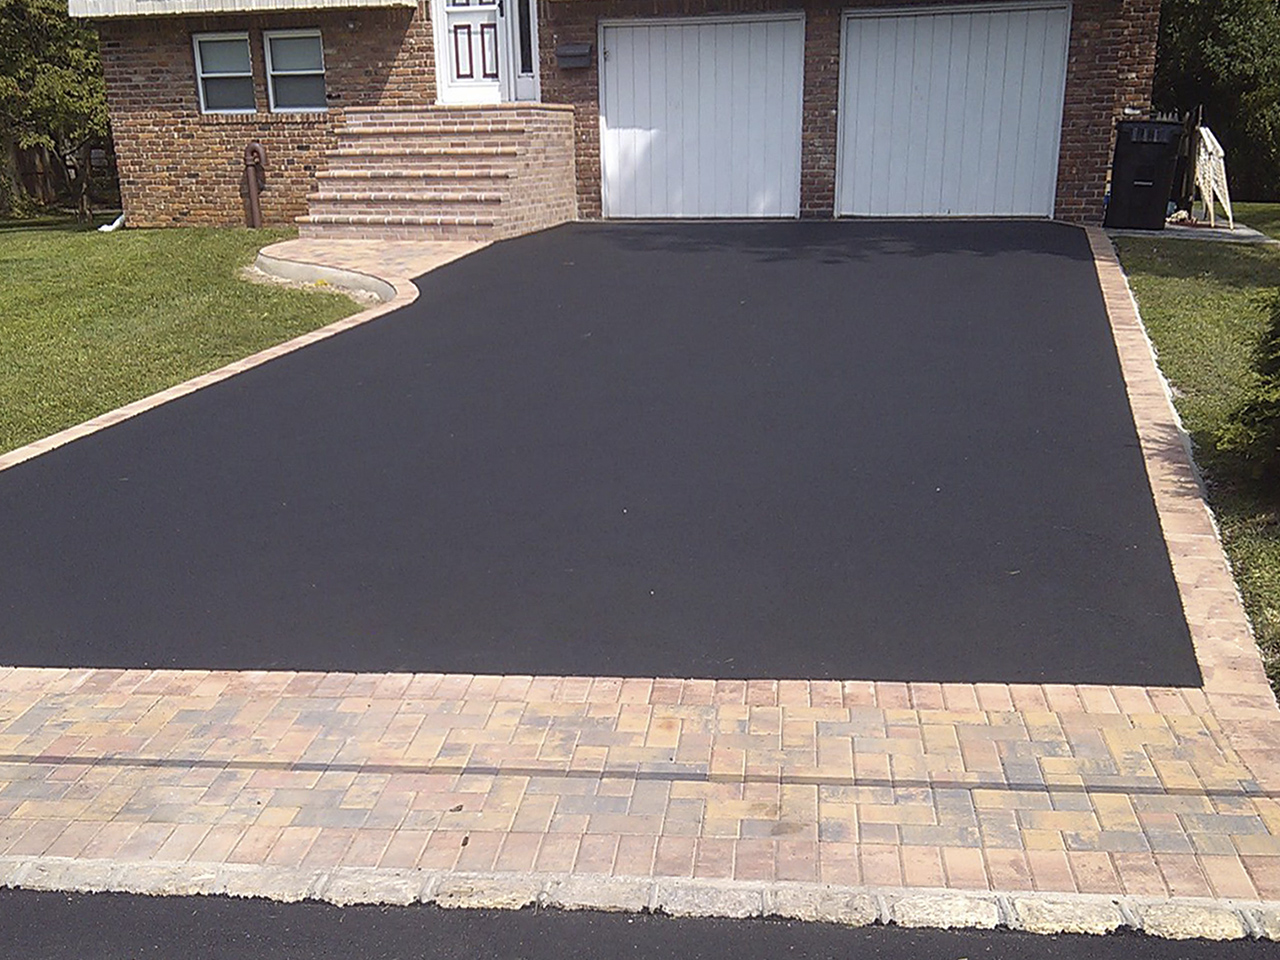 A spacious and well-defined driveway created by Affordable Patio, providing ample parking space.